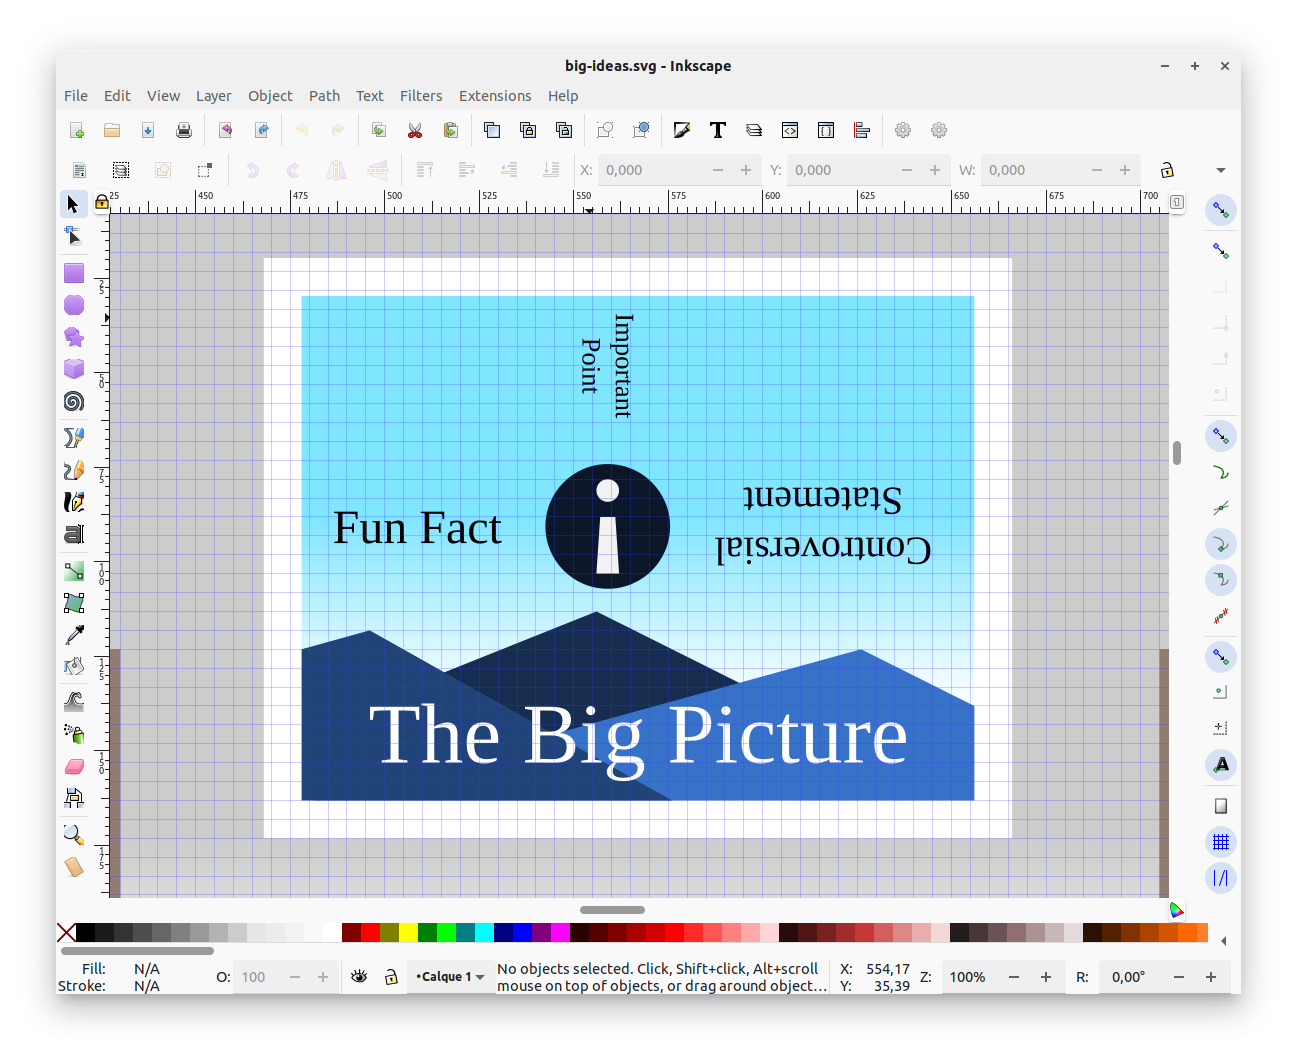 The base image big-ideas.svg opened in Inkscape